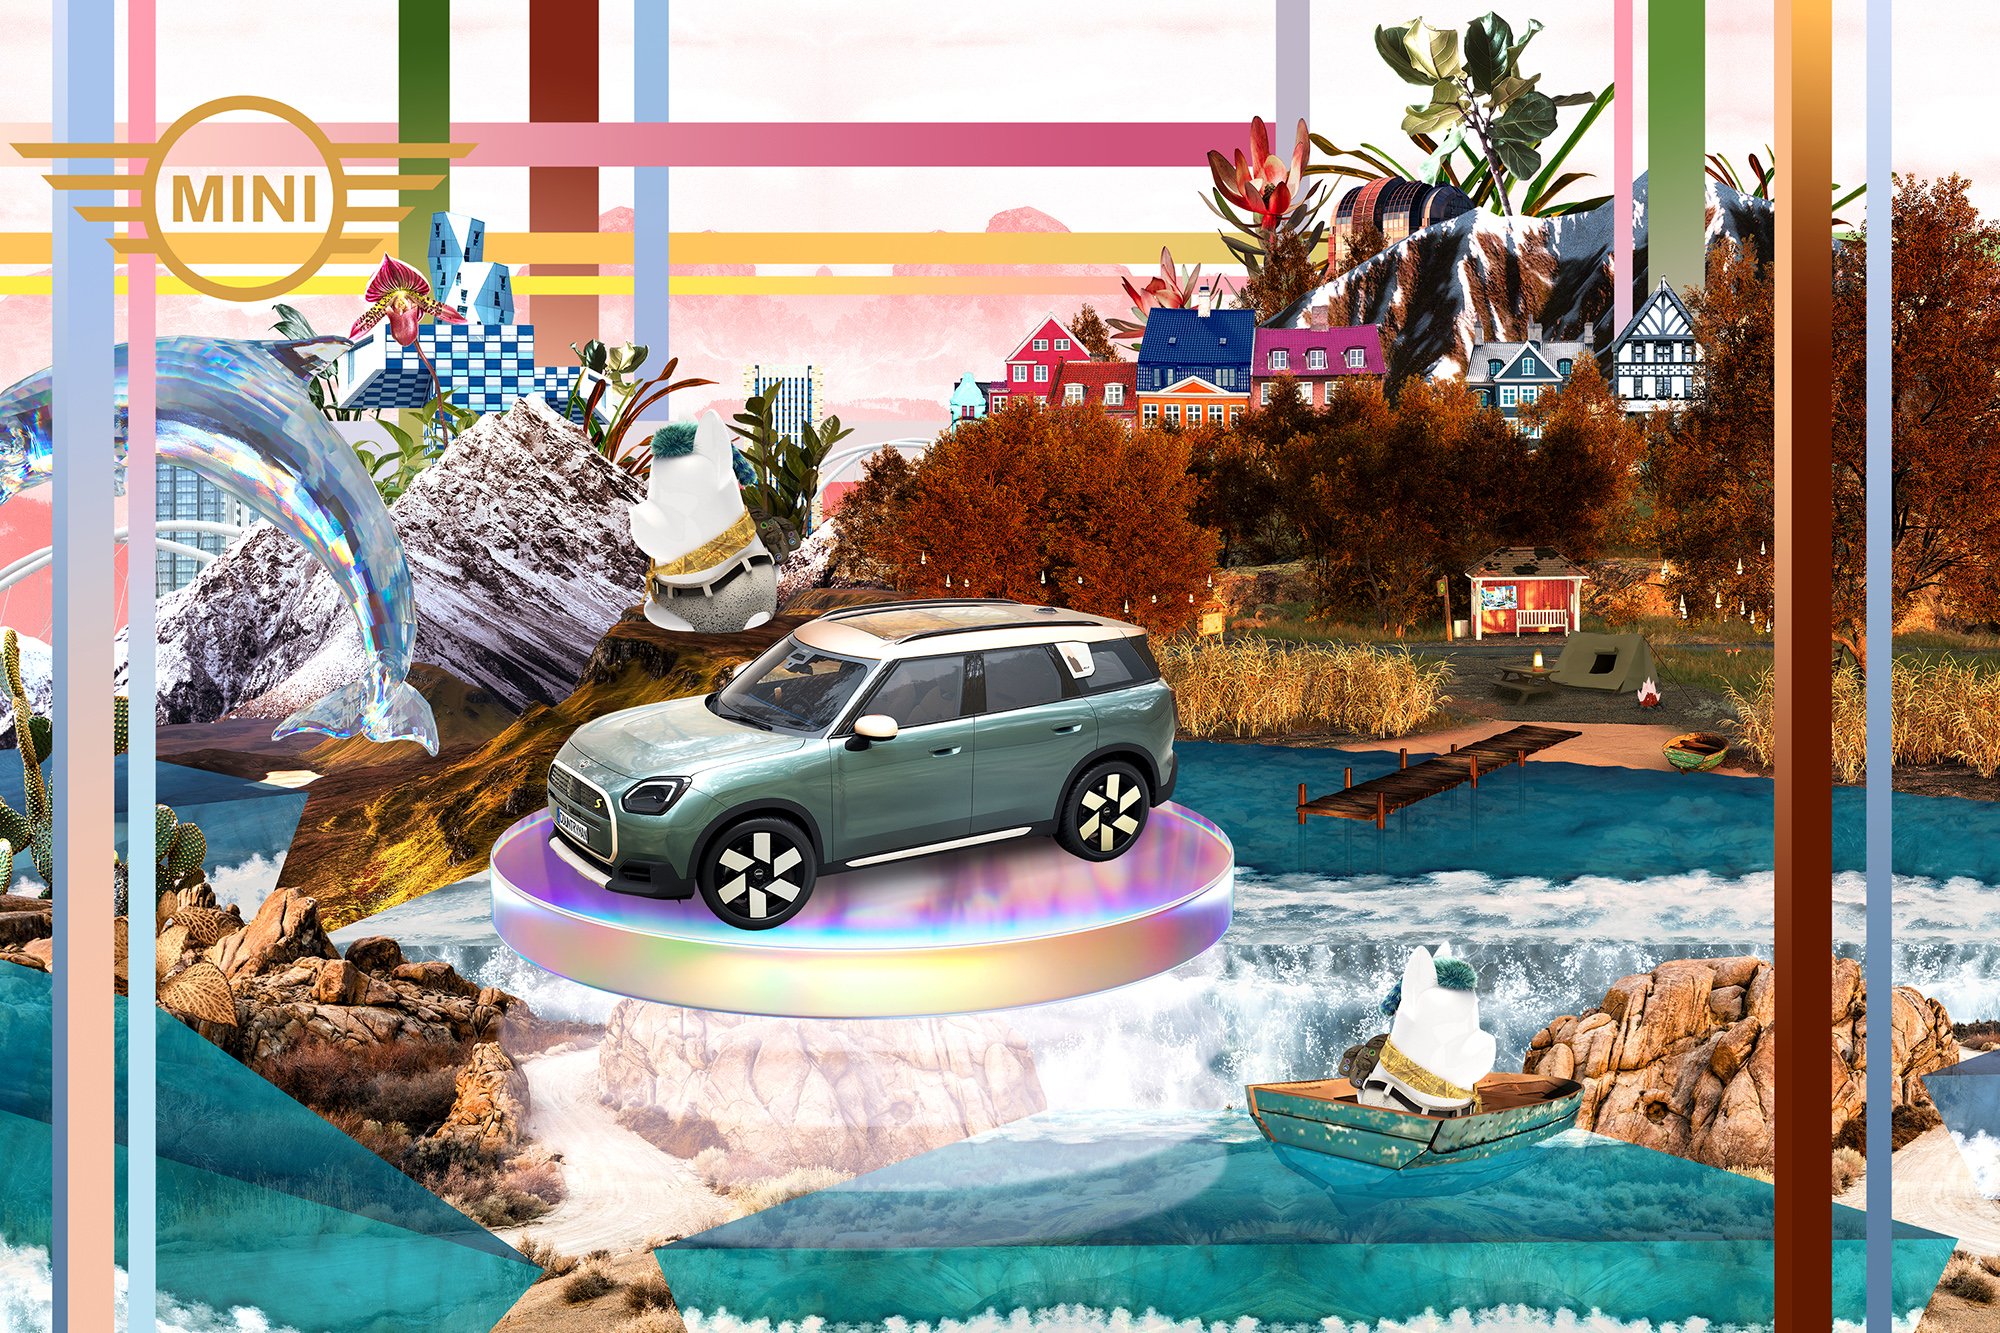 New MINI Countryman Electric in an art collages by Constantin Prozorov